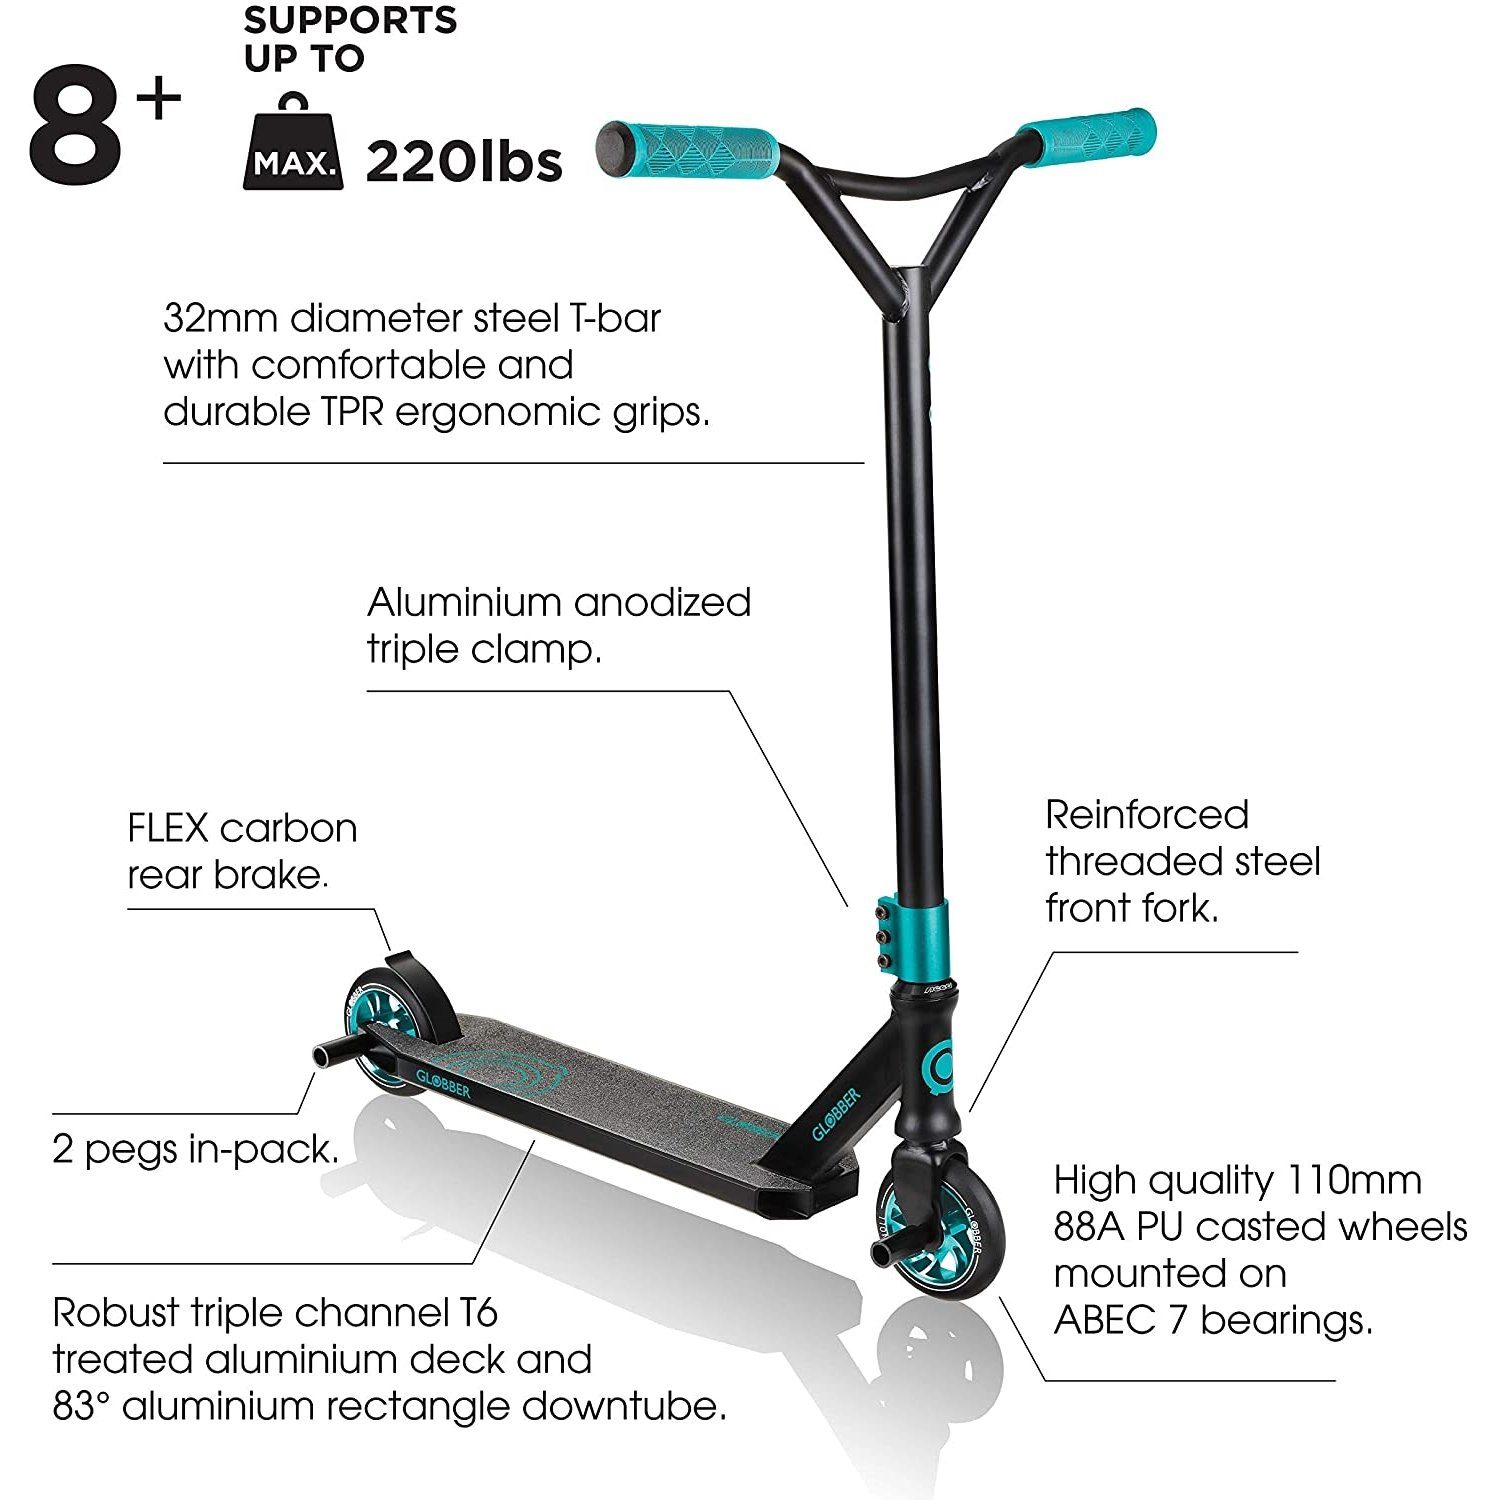 sports & schwarz-teal Türkis authentic 720 Stuntscooter Globber Scooter GS 624-009-2 toys